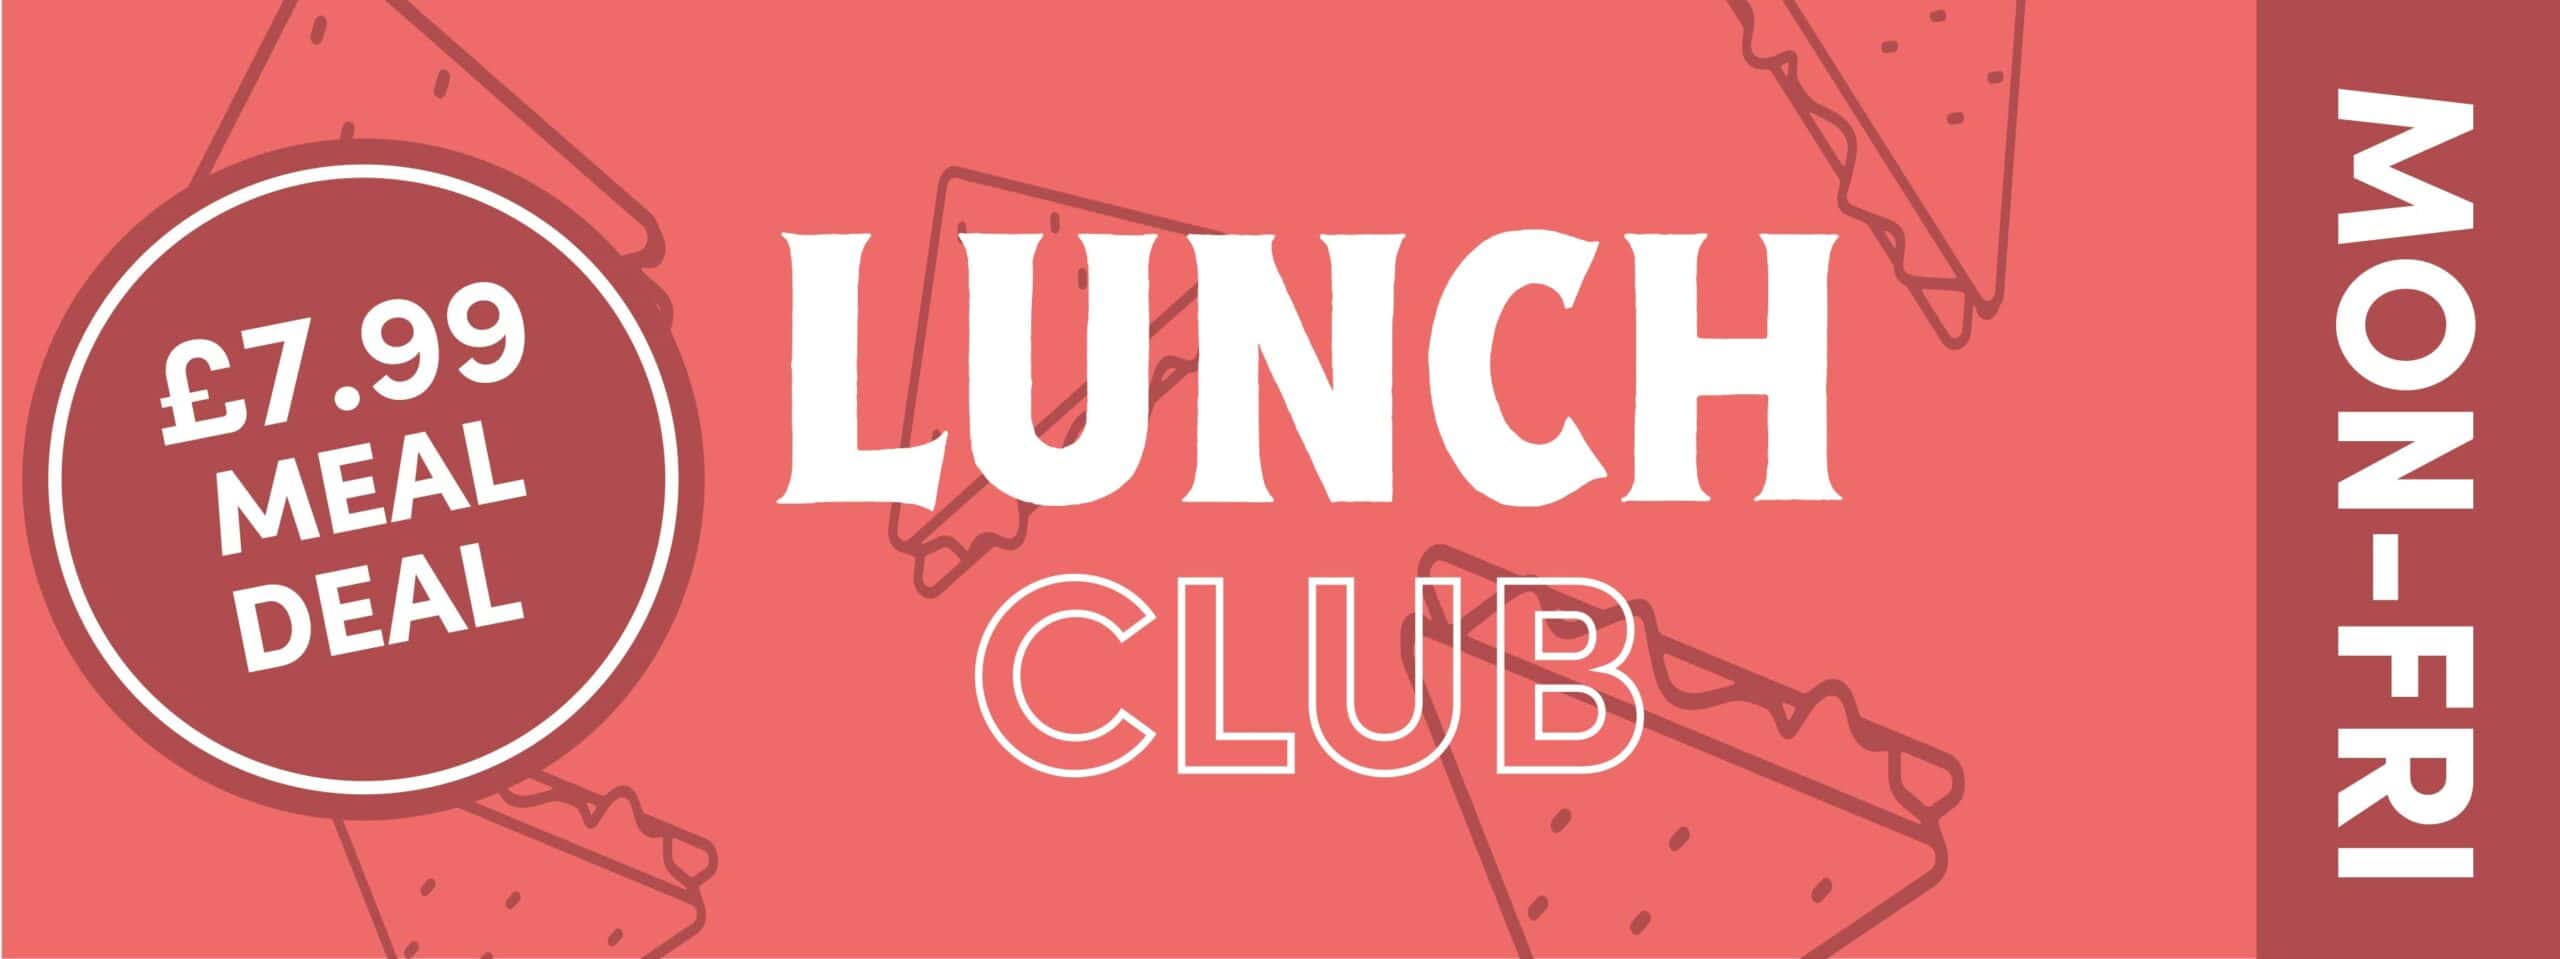 Lunch Club £7.99 Meal Deal